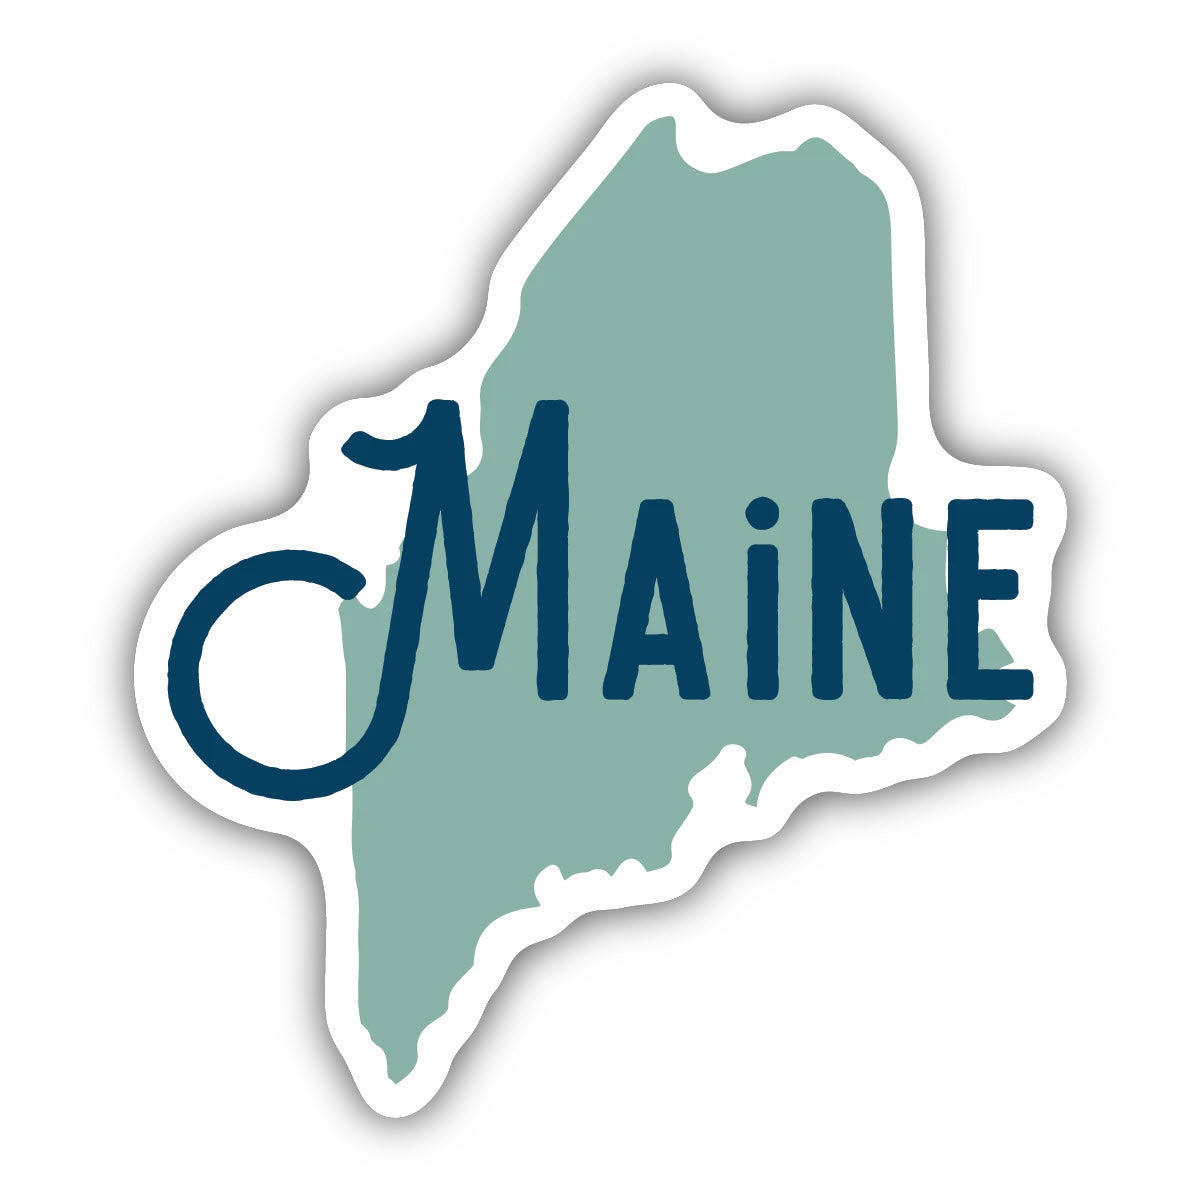 Stickers Northwest's Maine sticker design features the state of Maine's outline in teal with the word "Maine" superimposed in dark blue cursive, made to be weatherproof for water bottles.